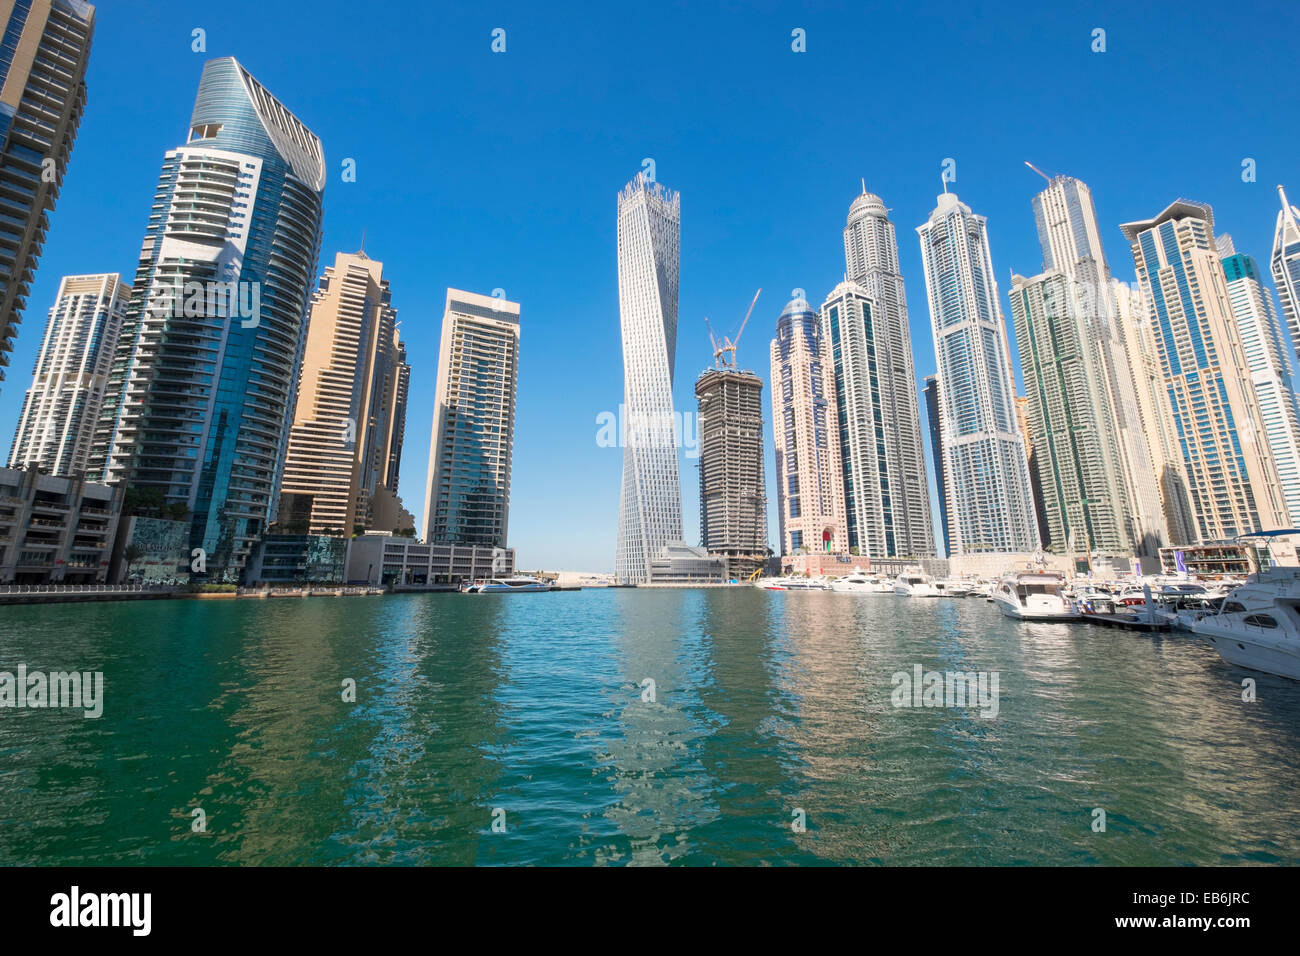 Daytime view of skyscrapers at Marina District in Dubai United Arab Emirates Stock Photo